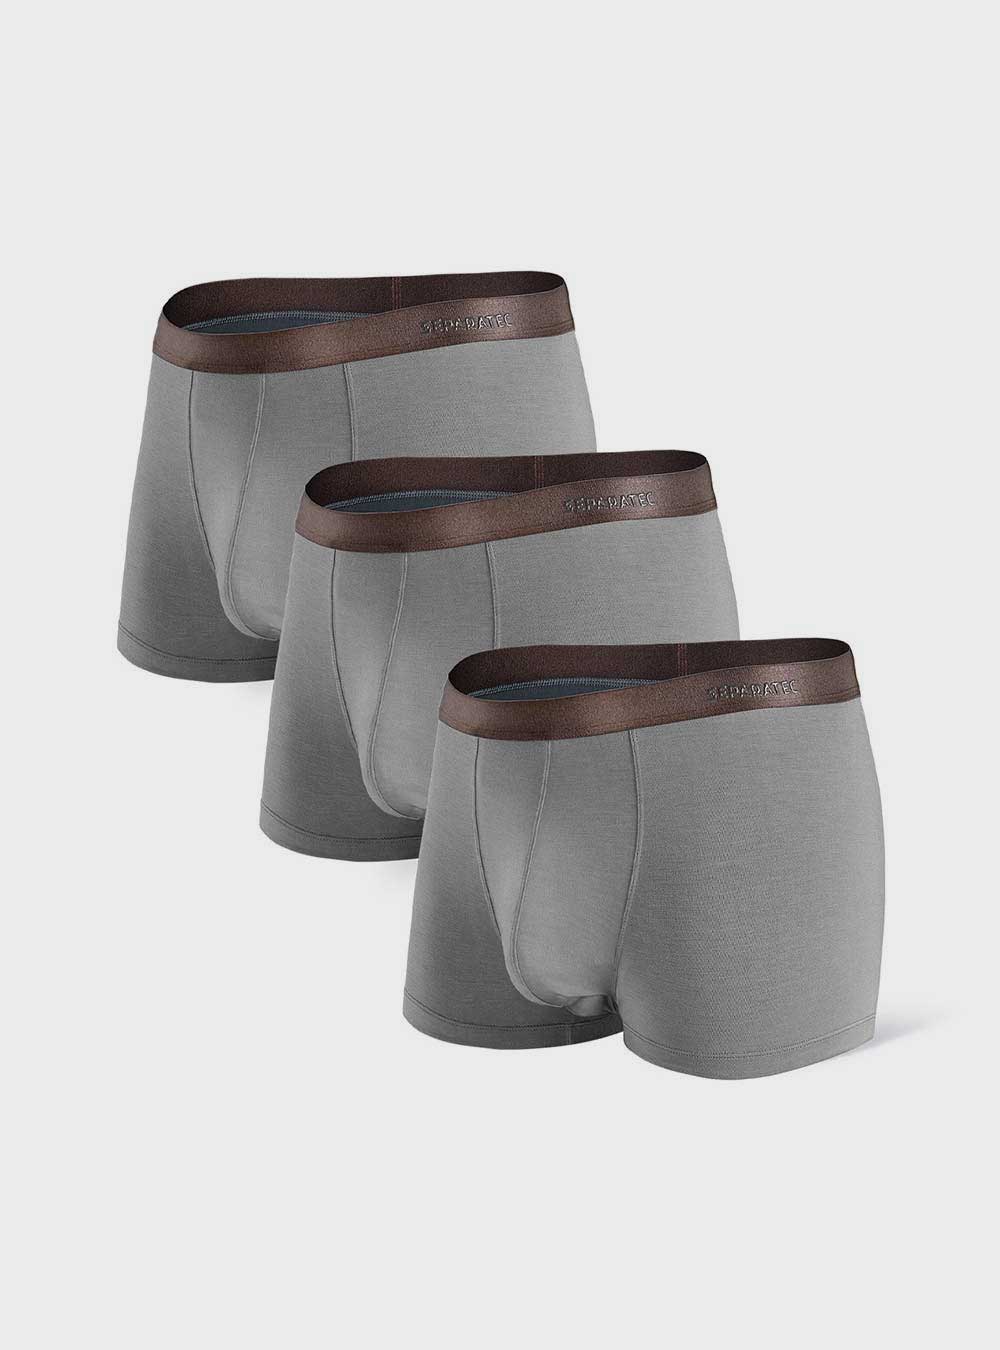 Dynamic Bamboo Rayon Trunks 3 Pack - Separatec